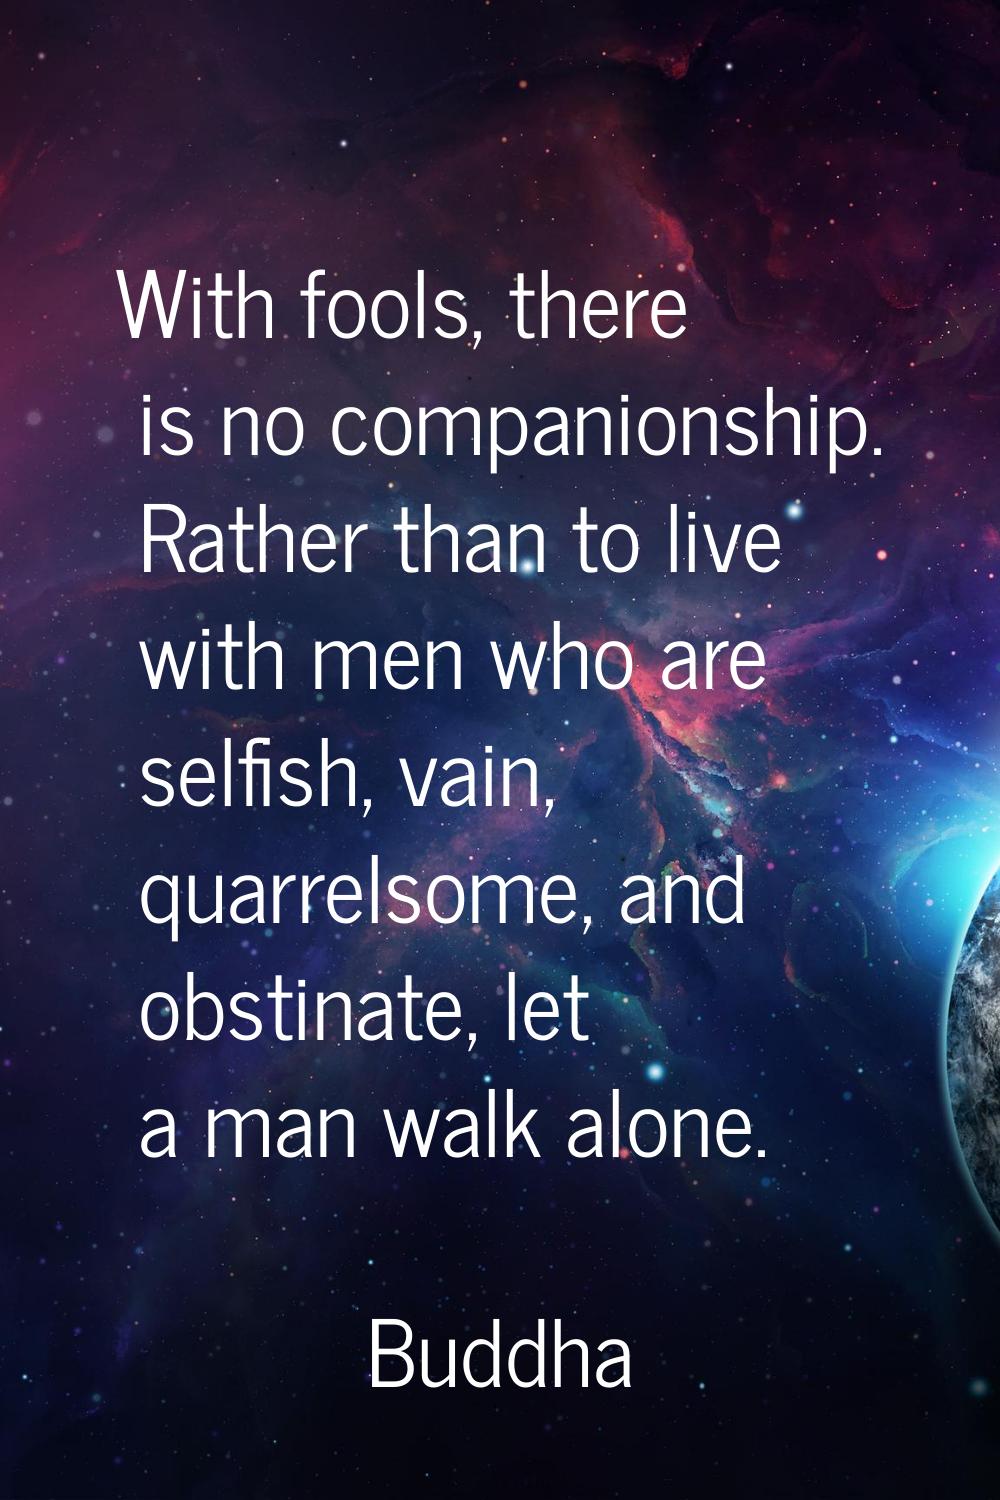 With fools, there is no companionship. Rather than to live with men who are selfish, vain, quarrels